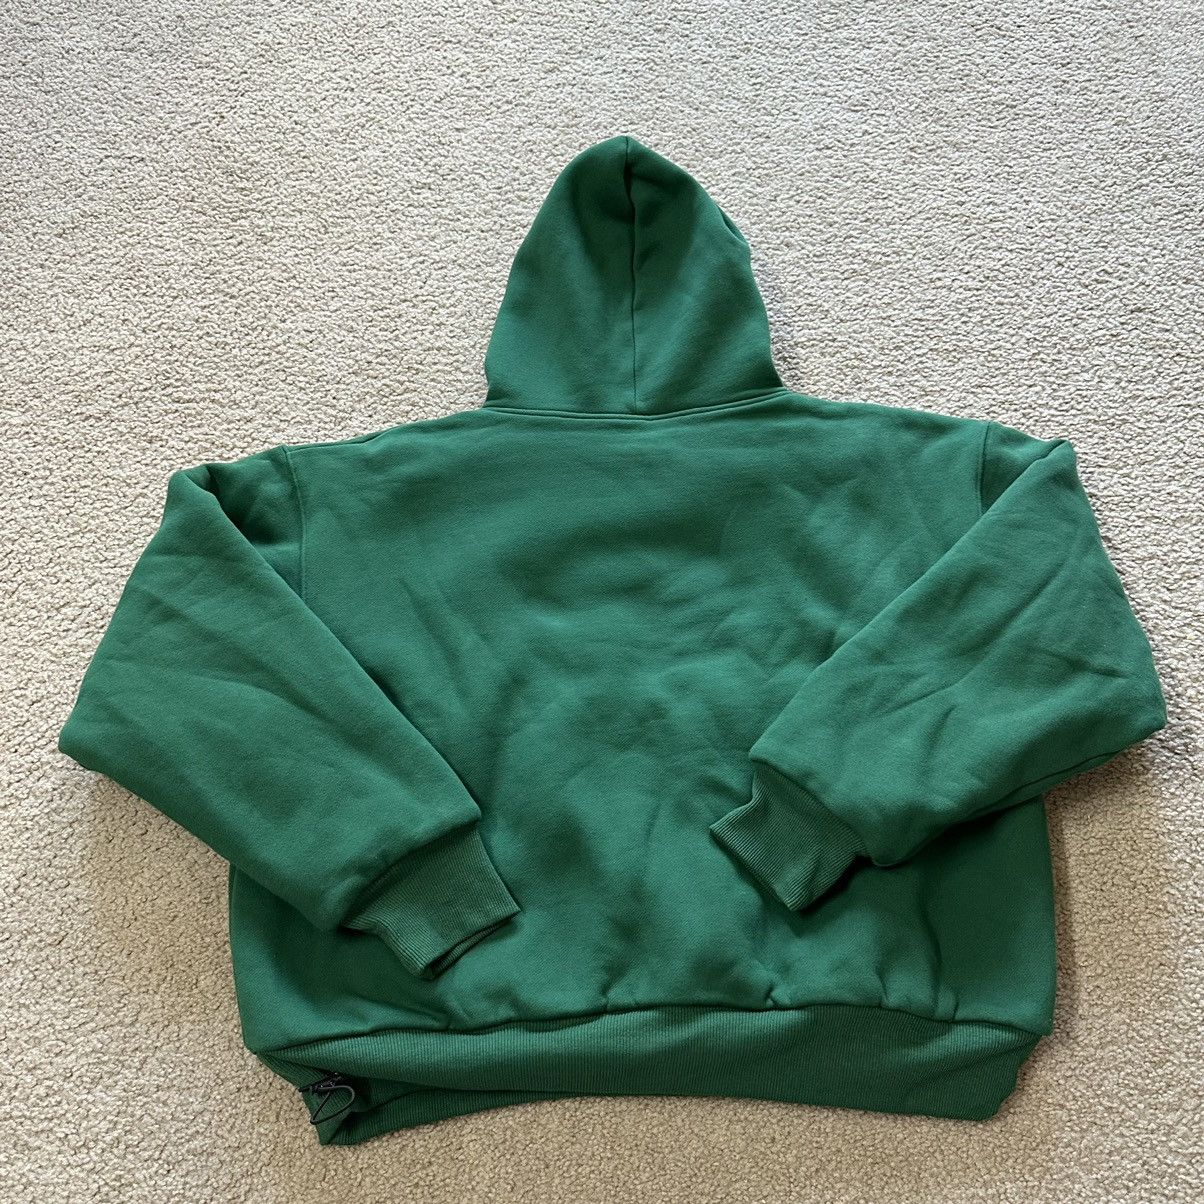 Hype Humane Blanks 1800 GSM Green Hoodie with CRDLCK Size US XL / EU 56 / 4 - 2 Preview